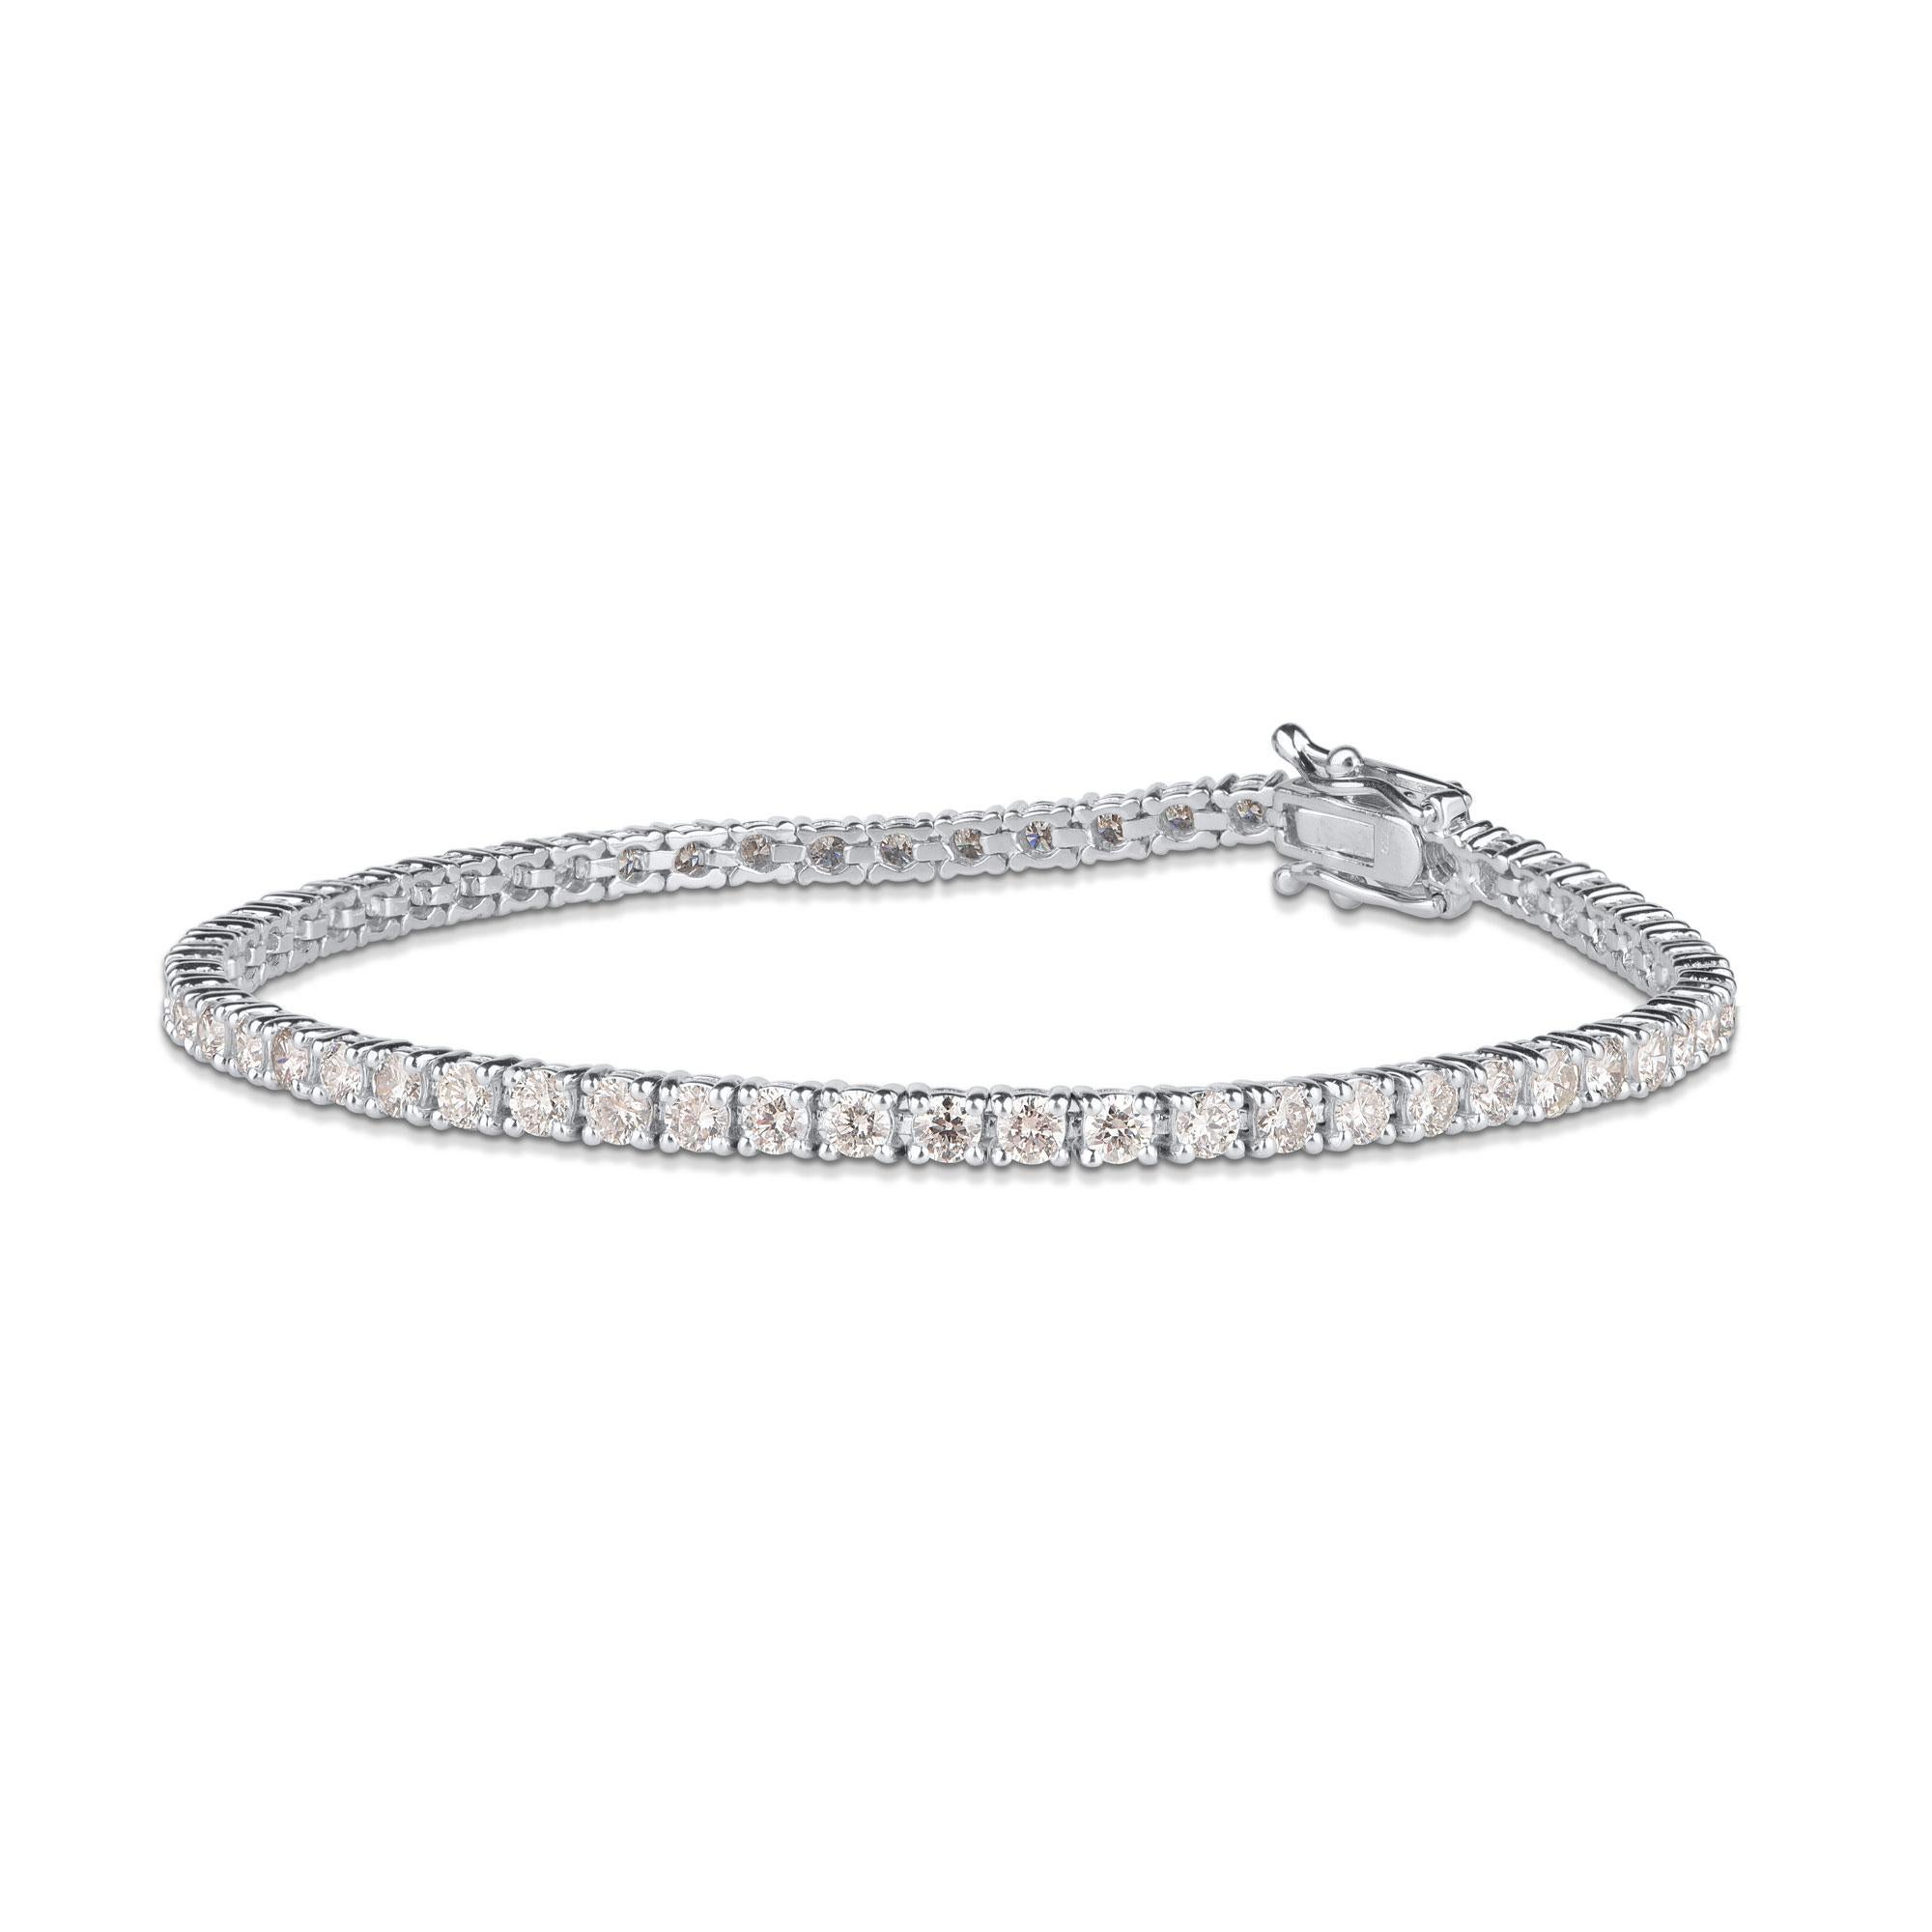 Experience the luxury and sophistication of this luxury diamond tennis bracelet. Made by our skillful craftsmen in 18 Karat White Gold and studded with 55 round brilliant-cut diamond set in prong setting. The total weight of diamond is 4.00 Carat